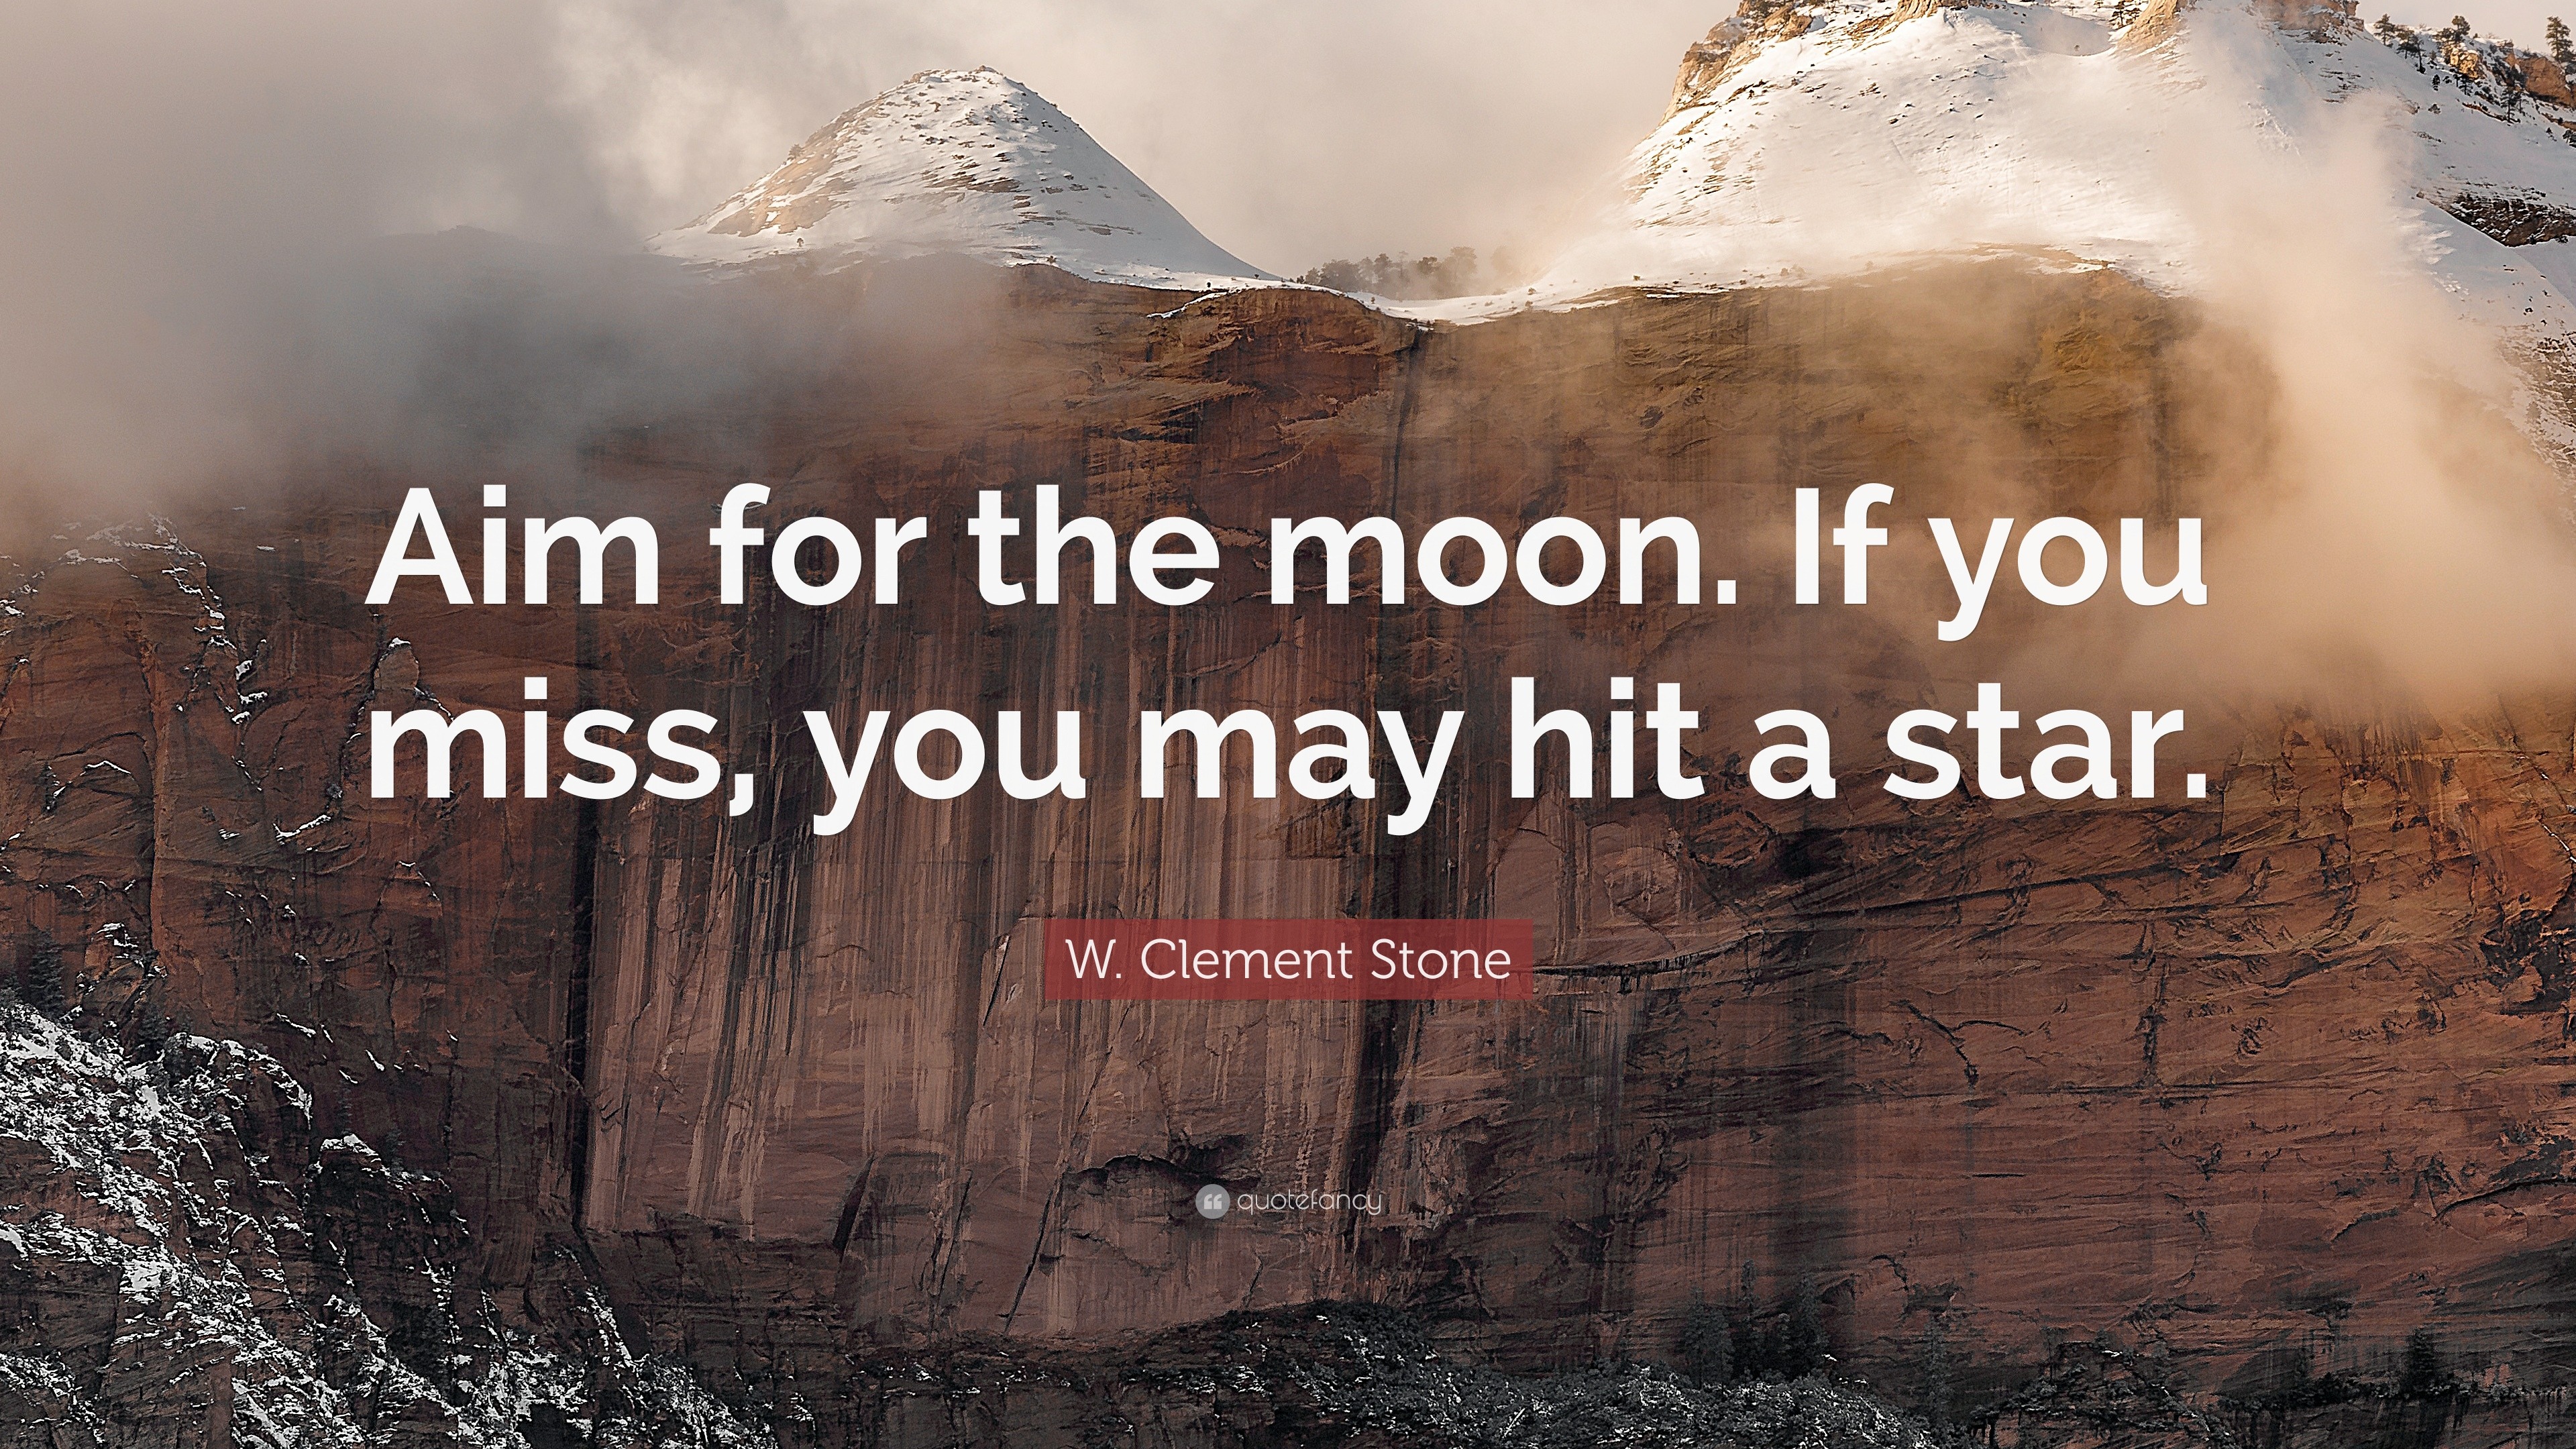 W. Clement Stone Quote: “Aim for the moon. If you miss, you may hit a